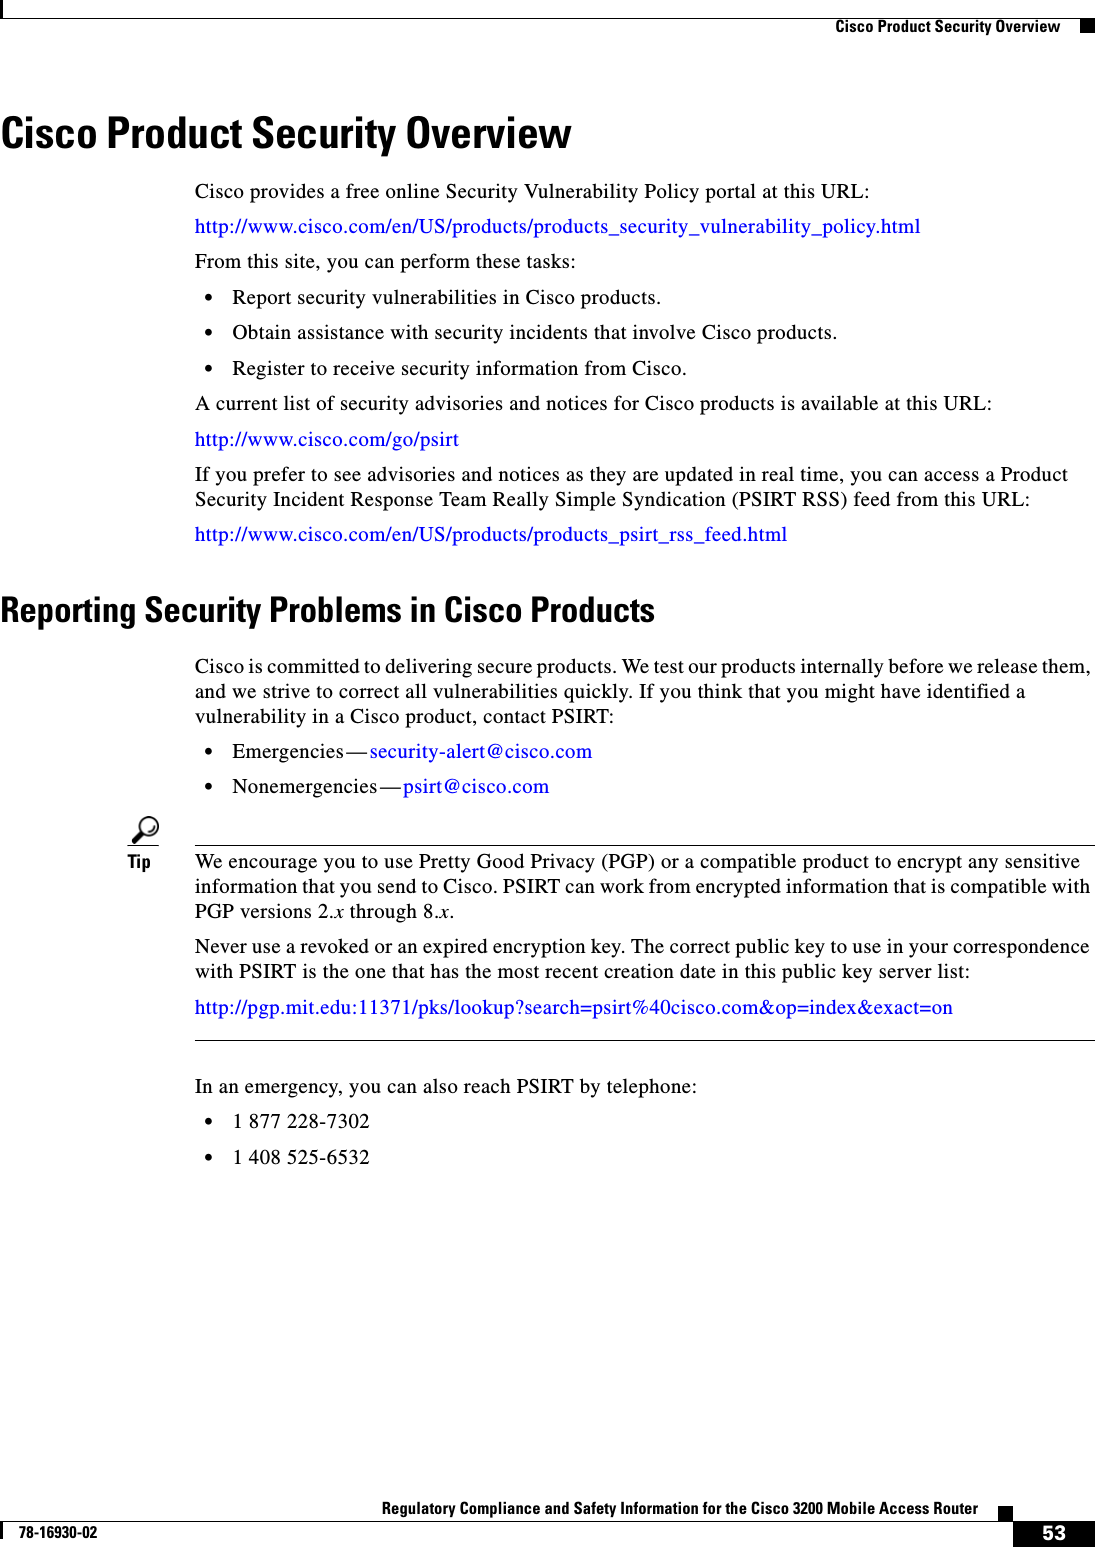 53Regulatory Compliance and Safety Information for the Cisco 3200 Mobile Access Router78-16930-02  Cisco Product Security OverviewCisco Product Security OverviewCisco provides a free online Security Vulnerability Policy portal at this URL:http://www.cisco.com/en/US/products/products_security_vulnerability_policy.htmlFrom this site, you can perform these tasks:•Report security vulnerabilities in Cisco products.•Obtain assistance with security incidents that involve Cisco products.•Register to receive security information from Cisco.A current list of security advisories and notices for Cisco products is available at this URL:http://www.cisco.com/go/psirtIf you prefer to see advisories and notices as they are updated in real time, you can access a Product Security Incident Response Team Really Simple Syndication (PSIRT RSS) feed from this URL:http://www.cisco.com/en/US/products/products_psirt_rss_feed.htmlReporting Security Problems in Cisco ProductsCisco is committed to delivering secure products. We test our products internally before we release them, and we strive to correct all vulnerabilities quickly. If you think that you might have identified a vulnerability in a Cisco product, contact PSIRT:•Emergencies—security-alert@cisco.com•Nonemergencies—psirt@cisco.comTip We encourage you to use Pretty Good Privacy (PGP) or a compatible product to encrypt any sensitive information that you send to Cisco. PSIRT can work from encrypted information that is compatible with PGP versions 2.x through 8.x.Never use a revoked or an expired encryption key. The correct public key to use in your correspondence with PSIRT is the one that has the most recent creation date in this public key server list:http://pgp.mit.edu:11371/pks/lookup?search=psirt%40cisco.com&amp;op=index&amp;exact=onIn an emergency, you can also reach PSIRT by telephone:•1 877 228-7302•1 408 525-6532